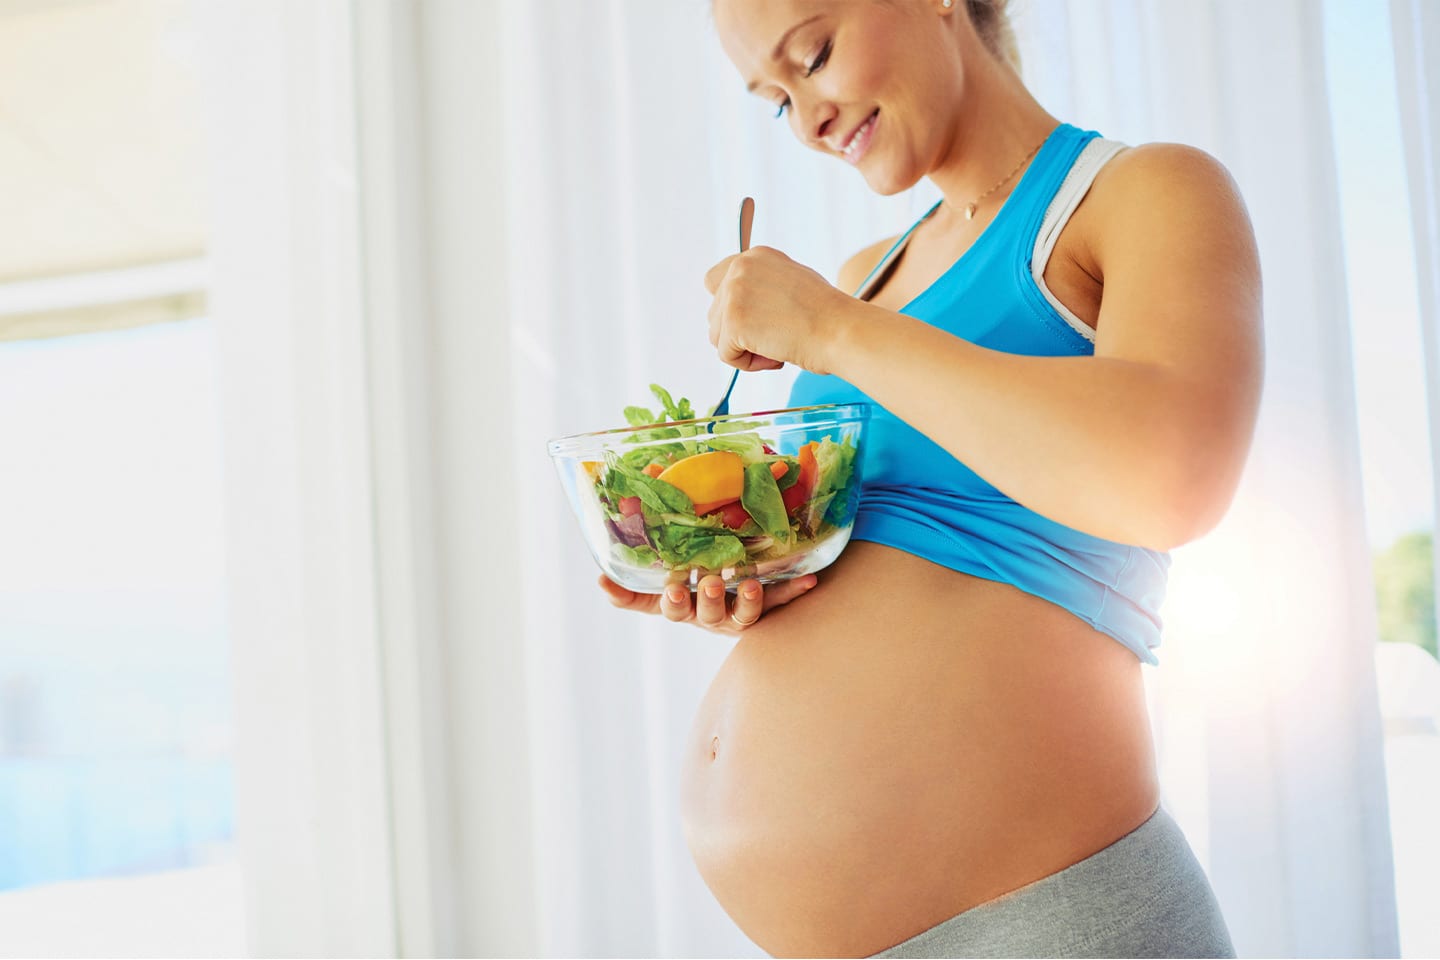 happy pregnant woman eating a salad after her workout